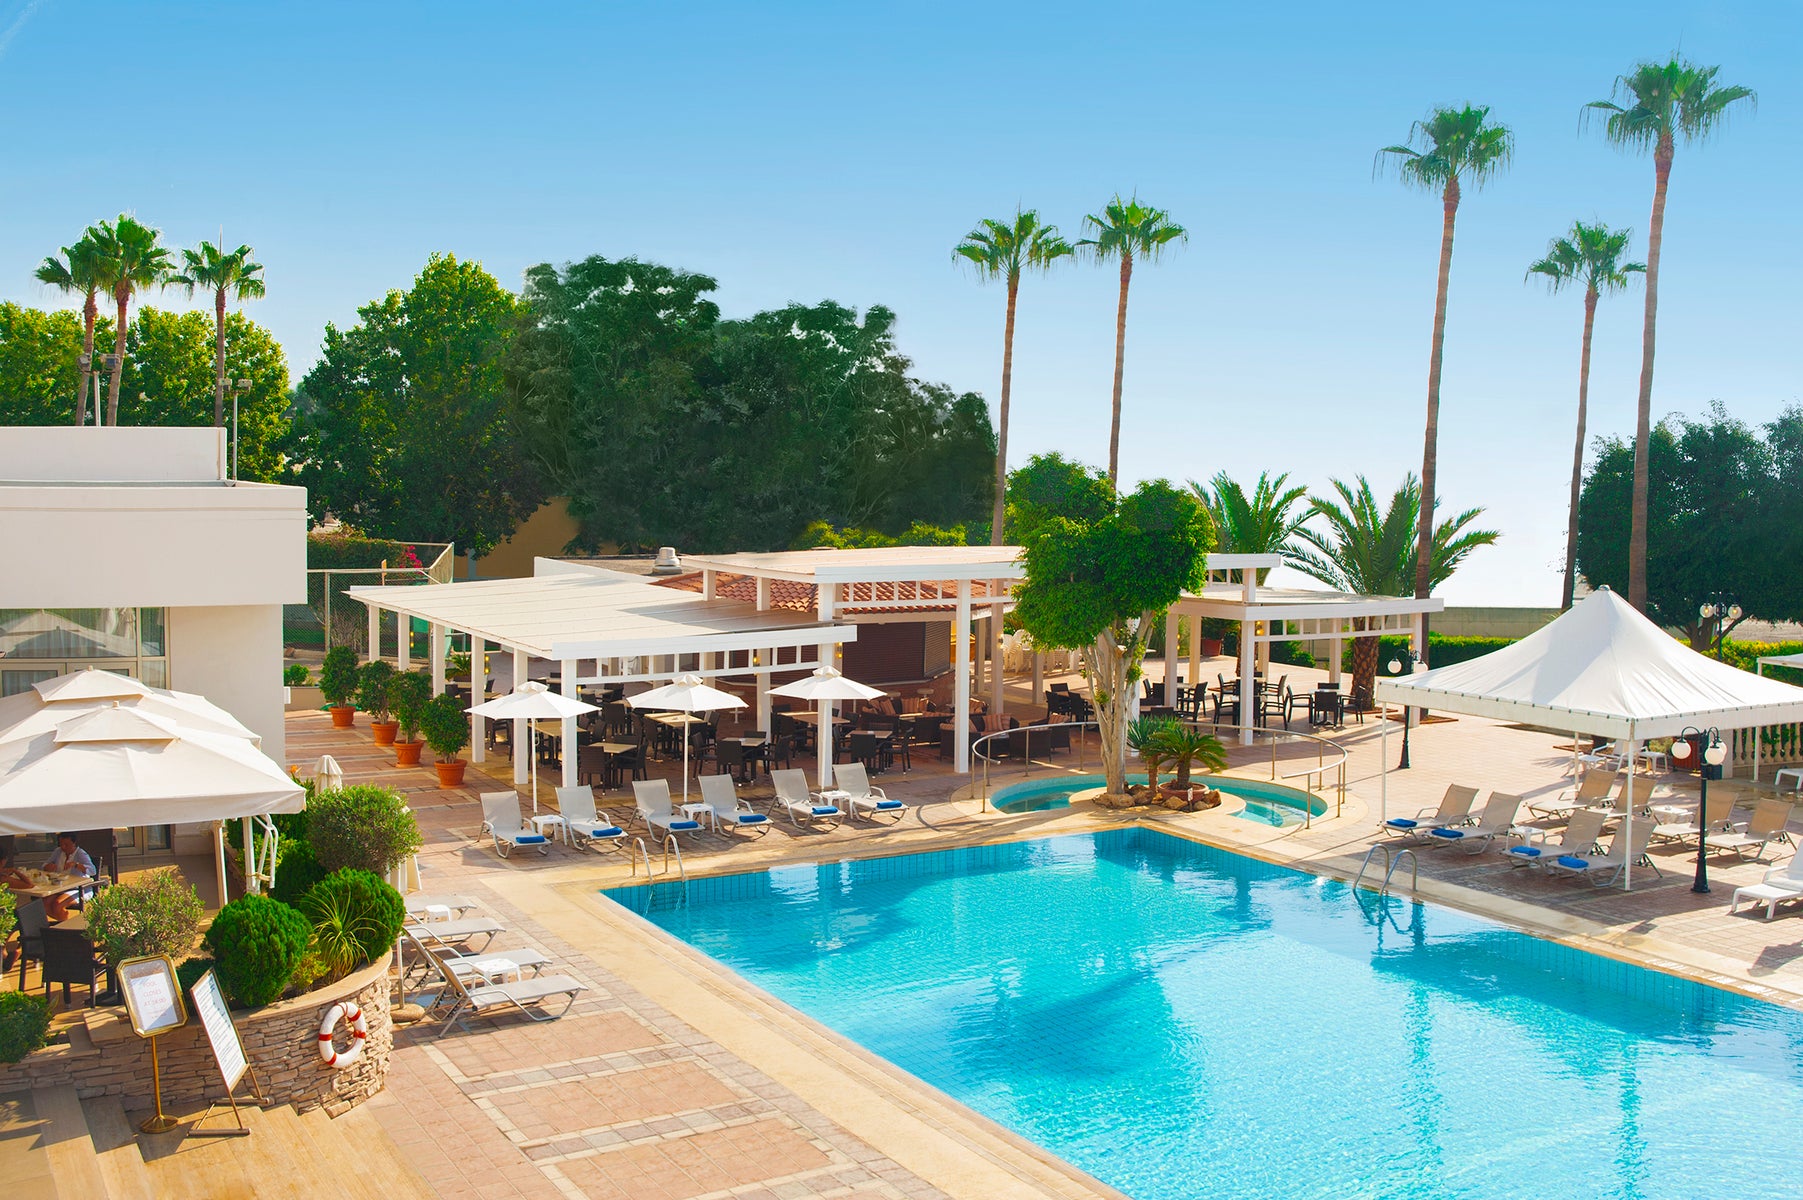 Ajax Hotel in Limassol, Cyprus - Holidays from £384 pp - loveholidays